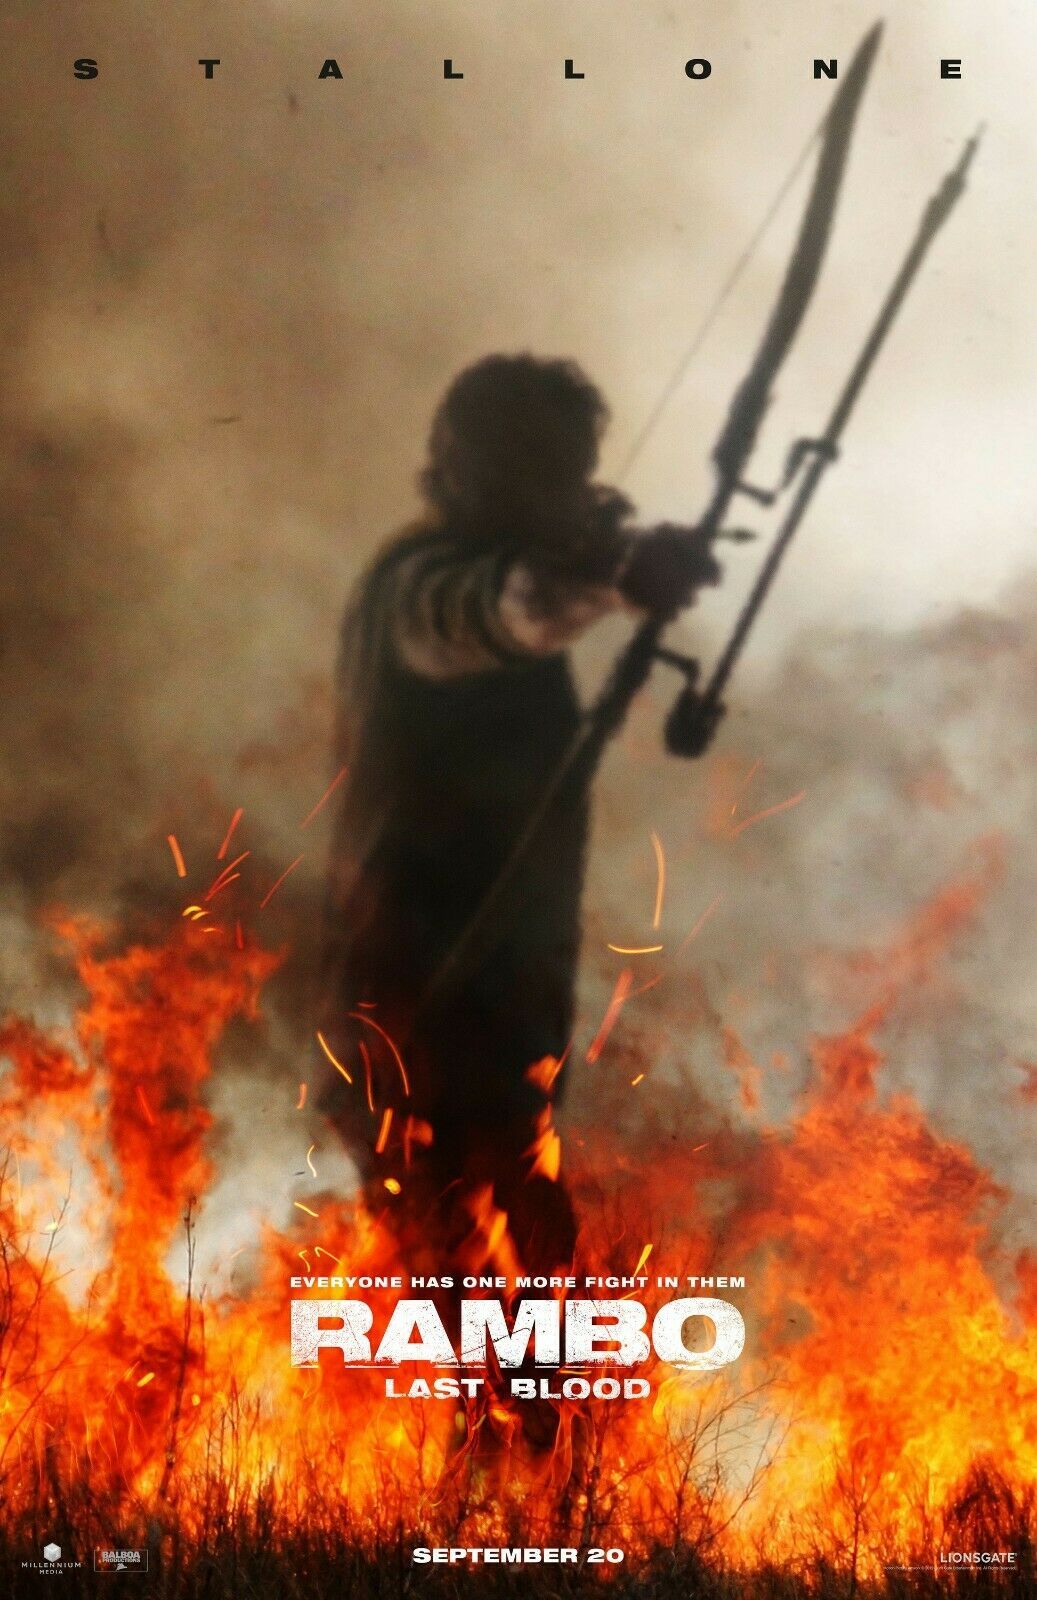 Rambo 5 Last Blood Poster Action Movie Sylvester Stallone Print 24x36" 27x40"